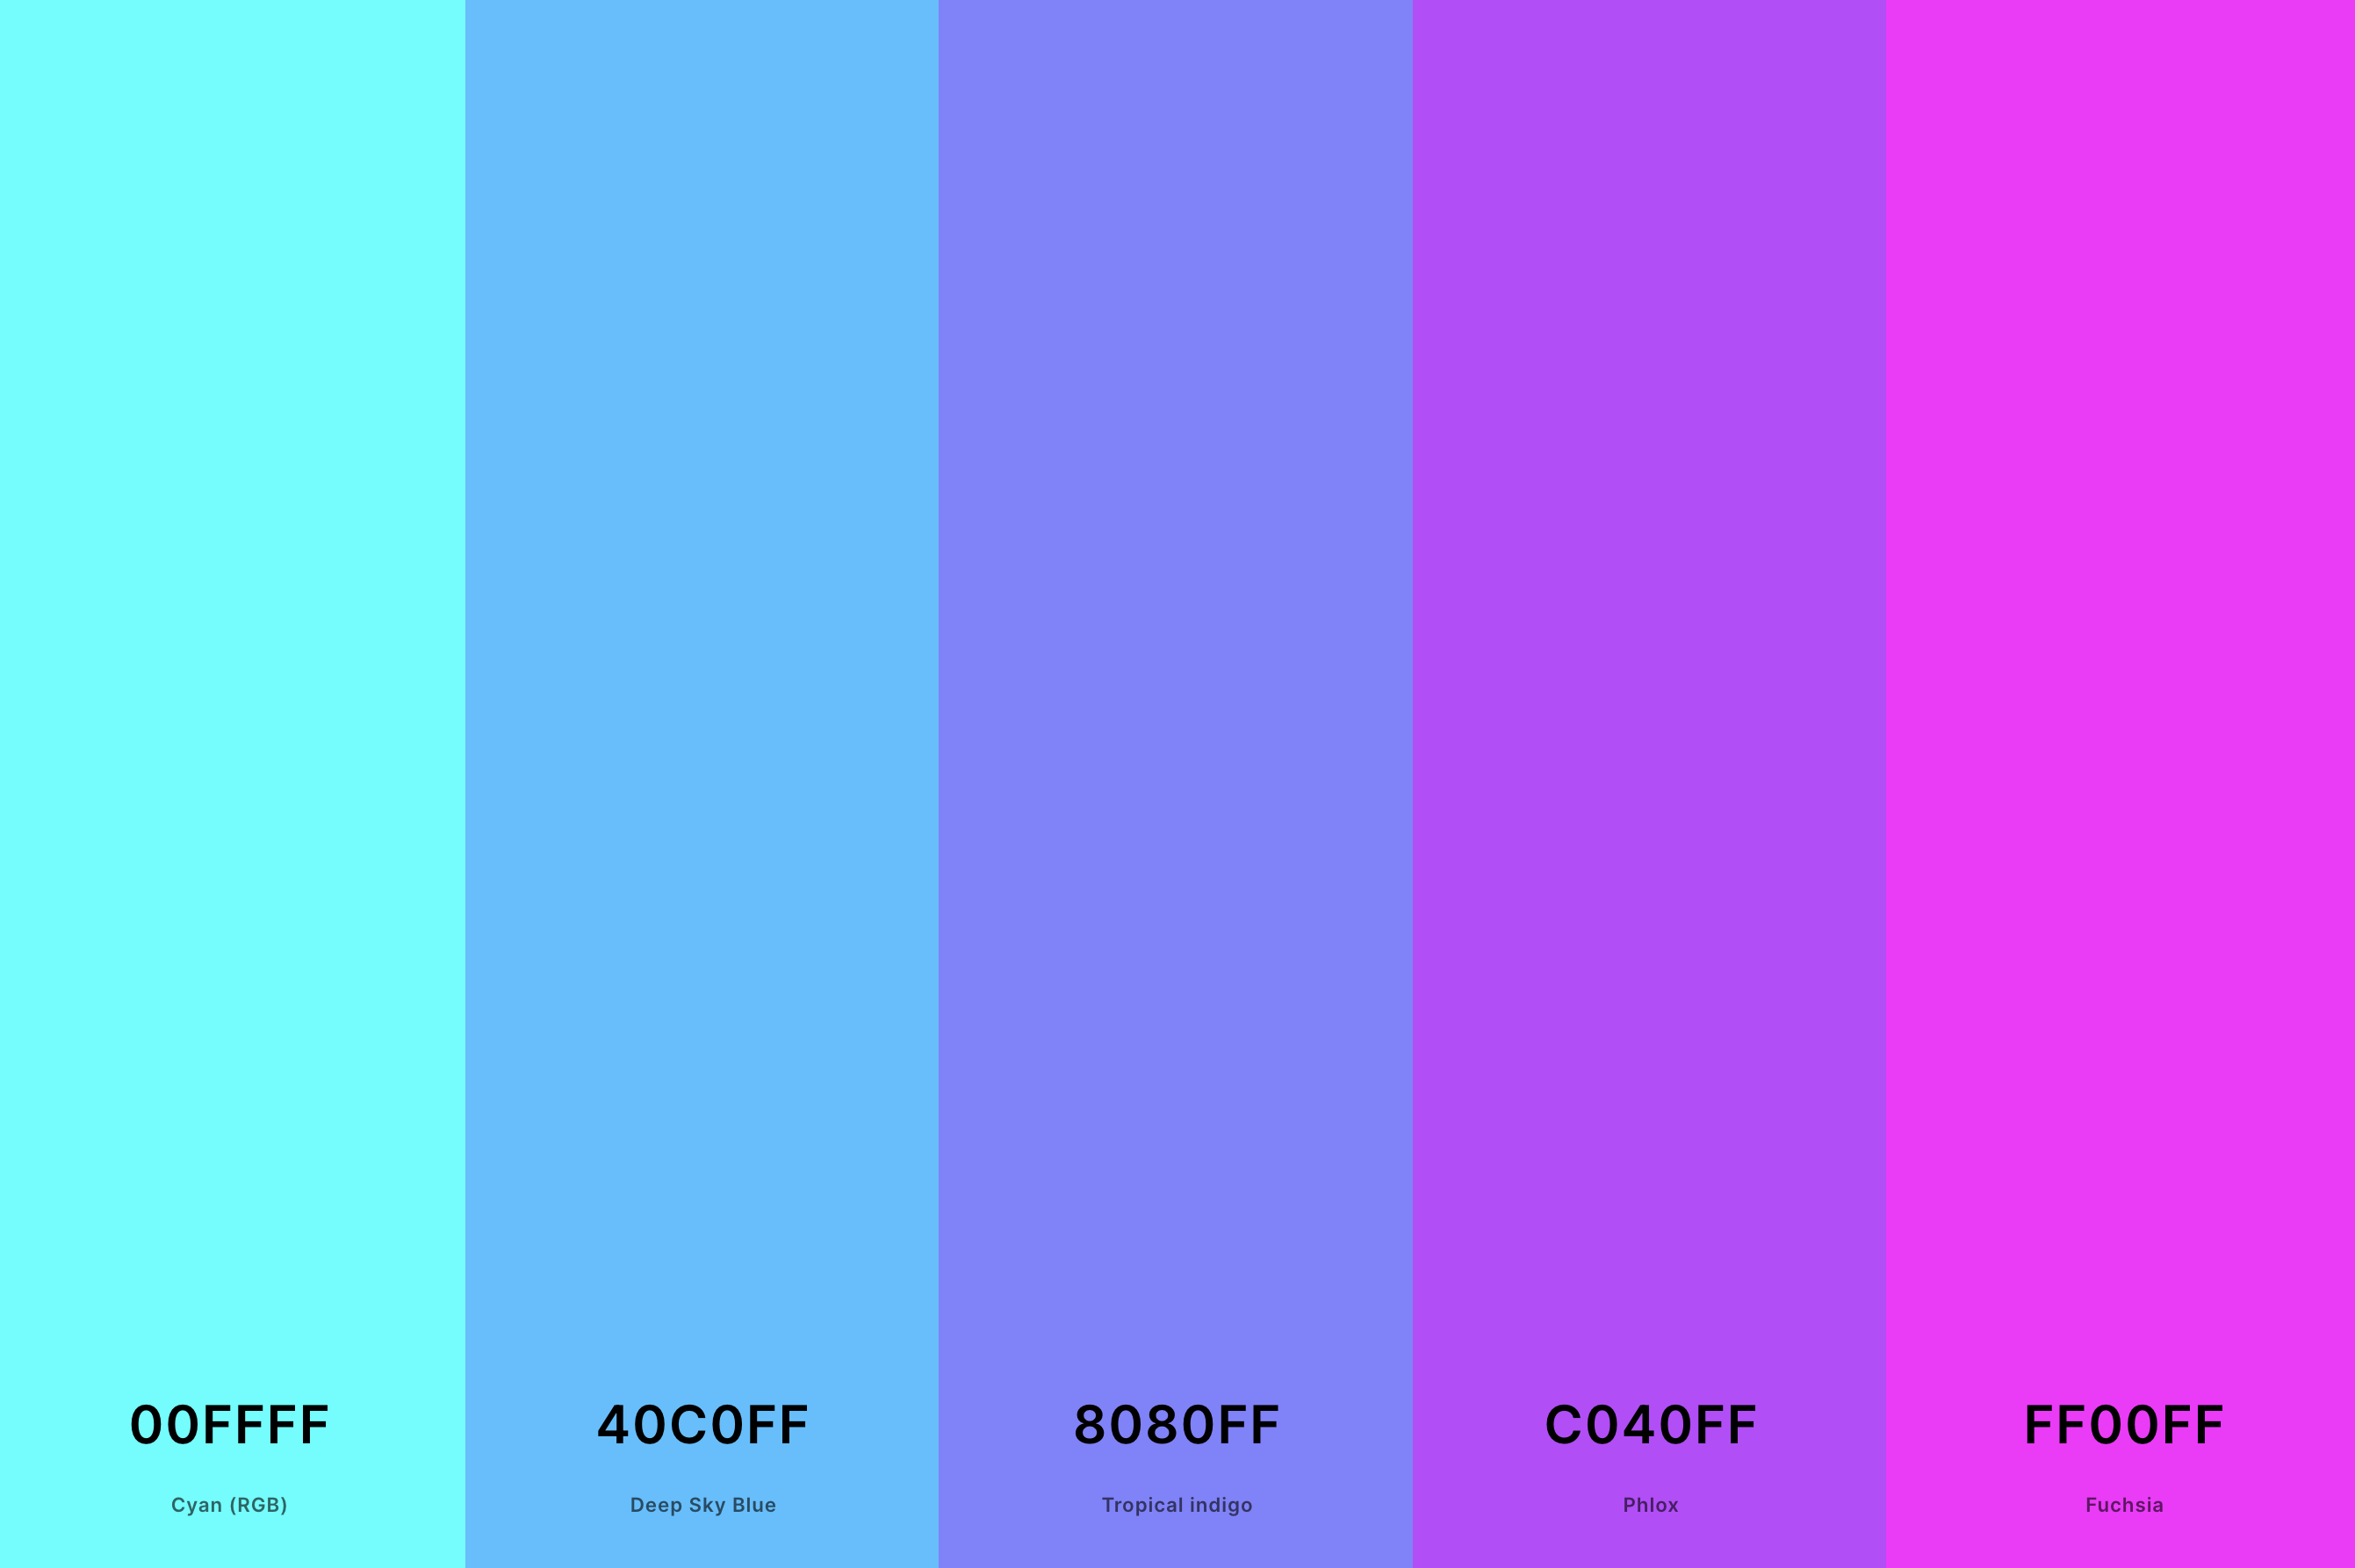 4. Magenta And Cyan Color Palette Color Palette with Cyan (Rgb) (Hex #00FFFF) + Deep Sky Blue (Hex #40C0FF) + Tropical Indigo (Hex #8080FF) + Phlox (Hex #C040FF) + Magenta (Hex #FF00FF) Color Palette with Hex Codes